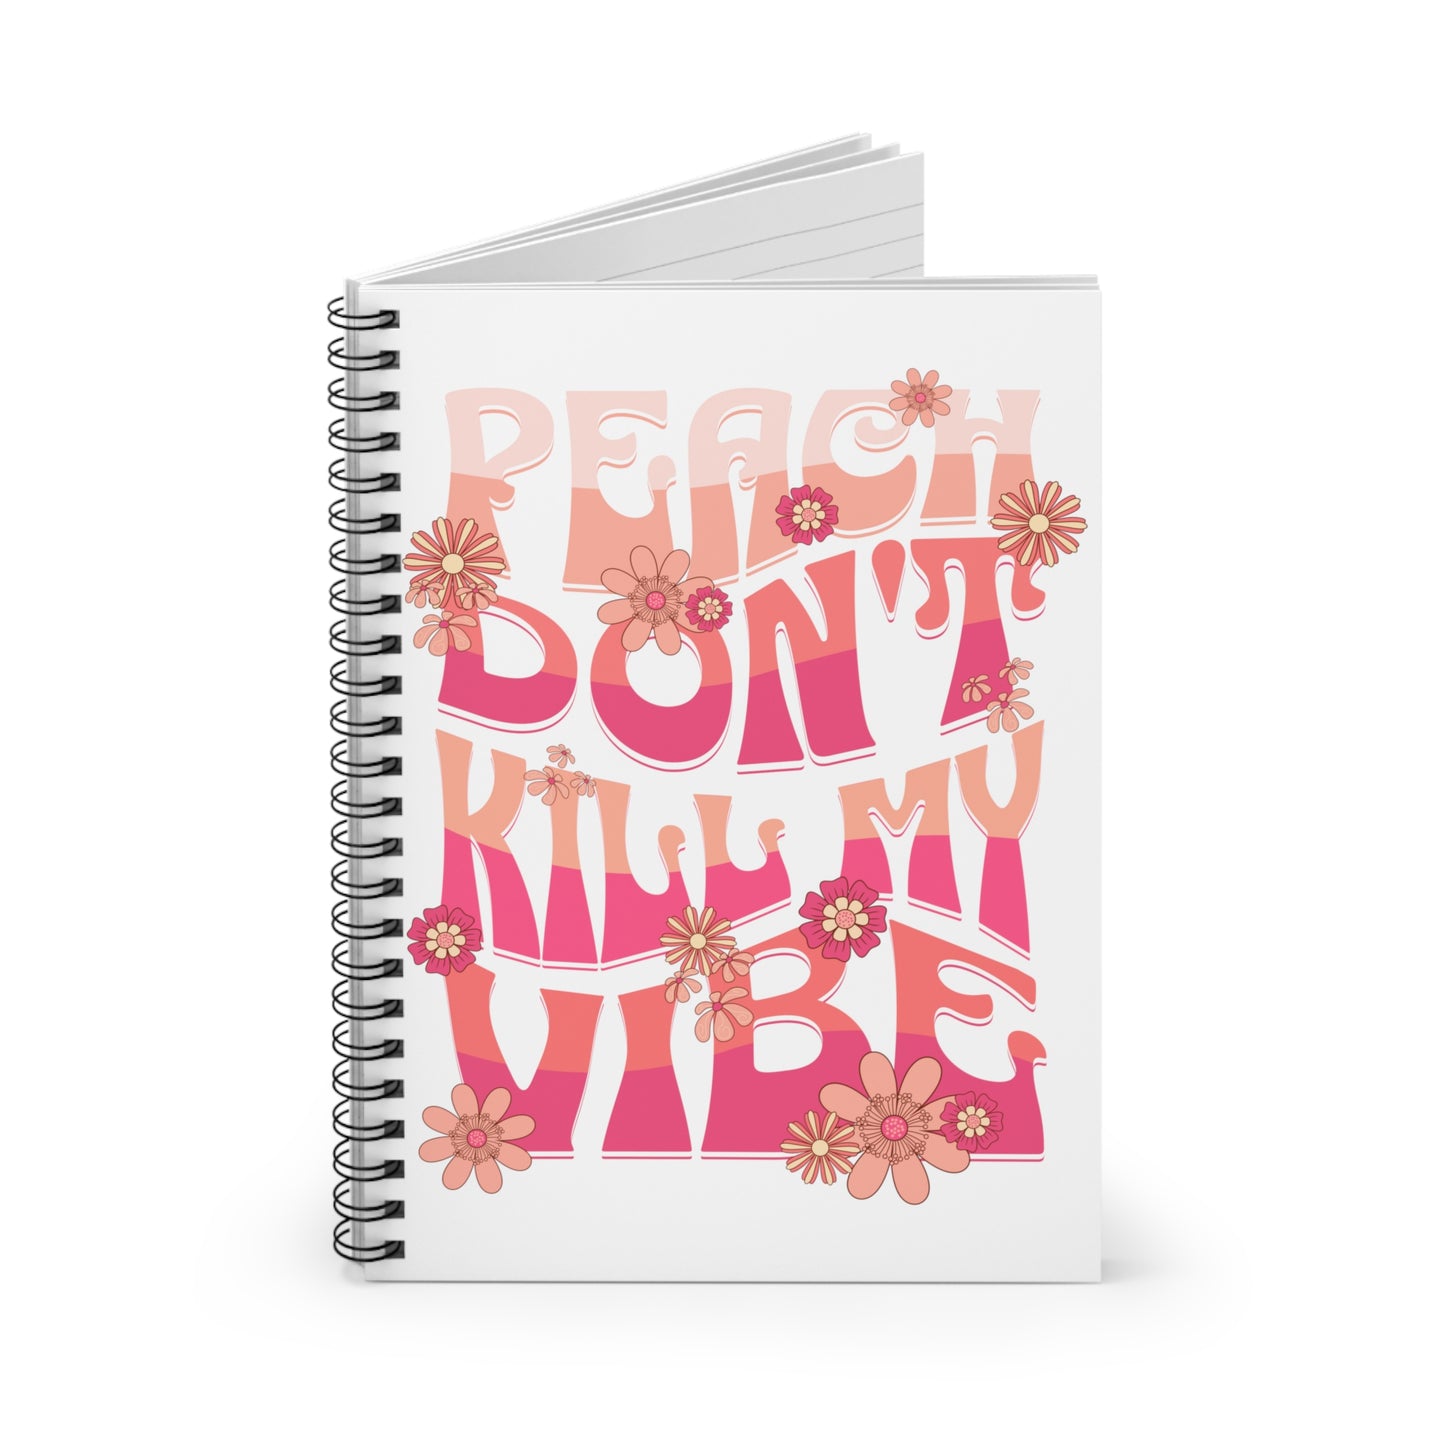 Peach Don't Kill My Vibe Spiral Notebook - Ruled Line